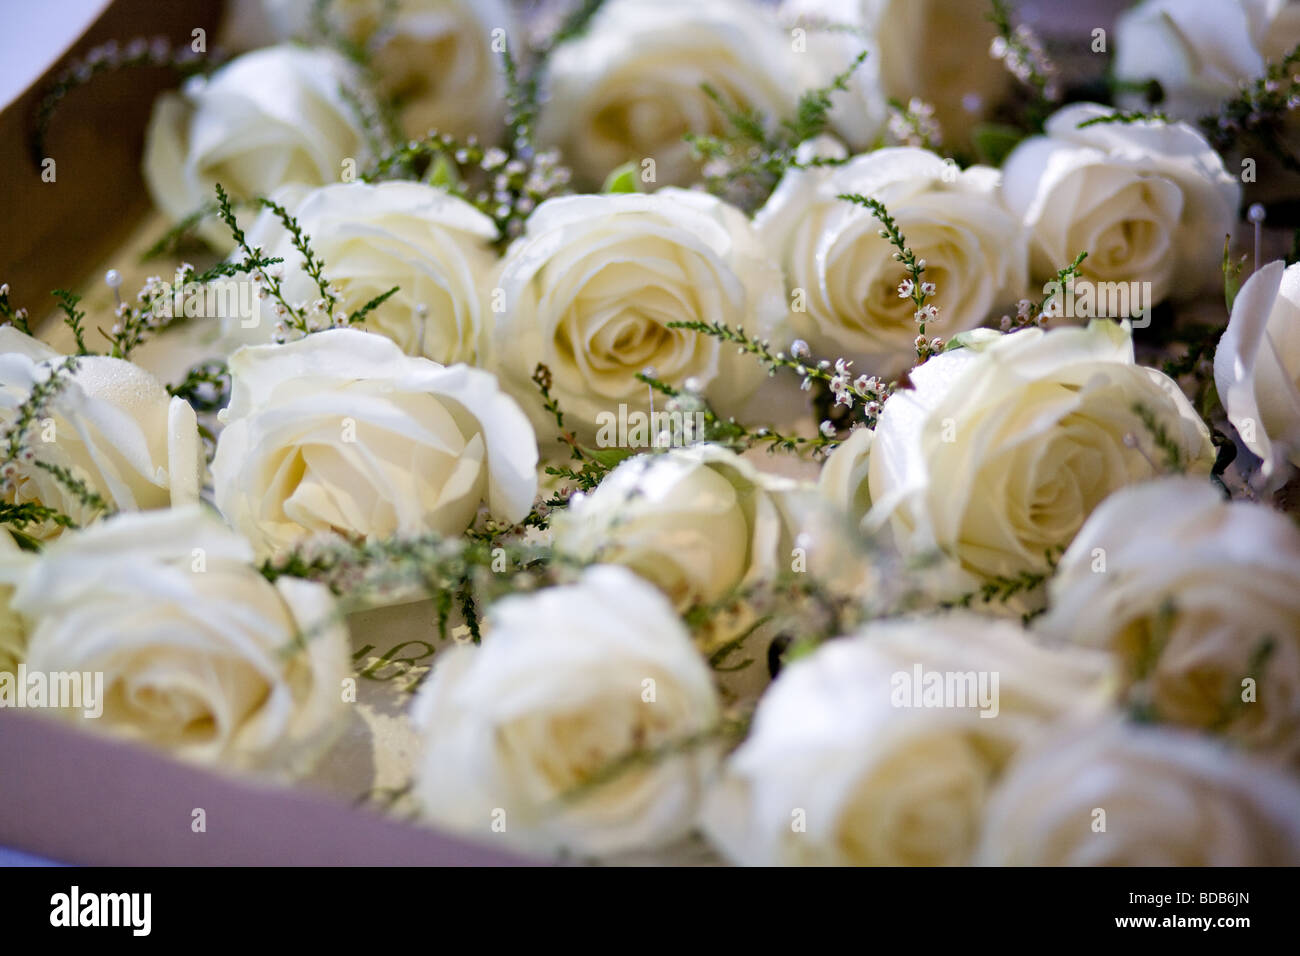 Wedding roses fresh and ready to pin Stock Photo